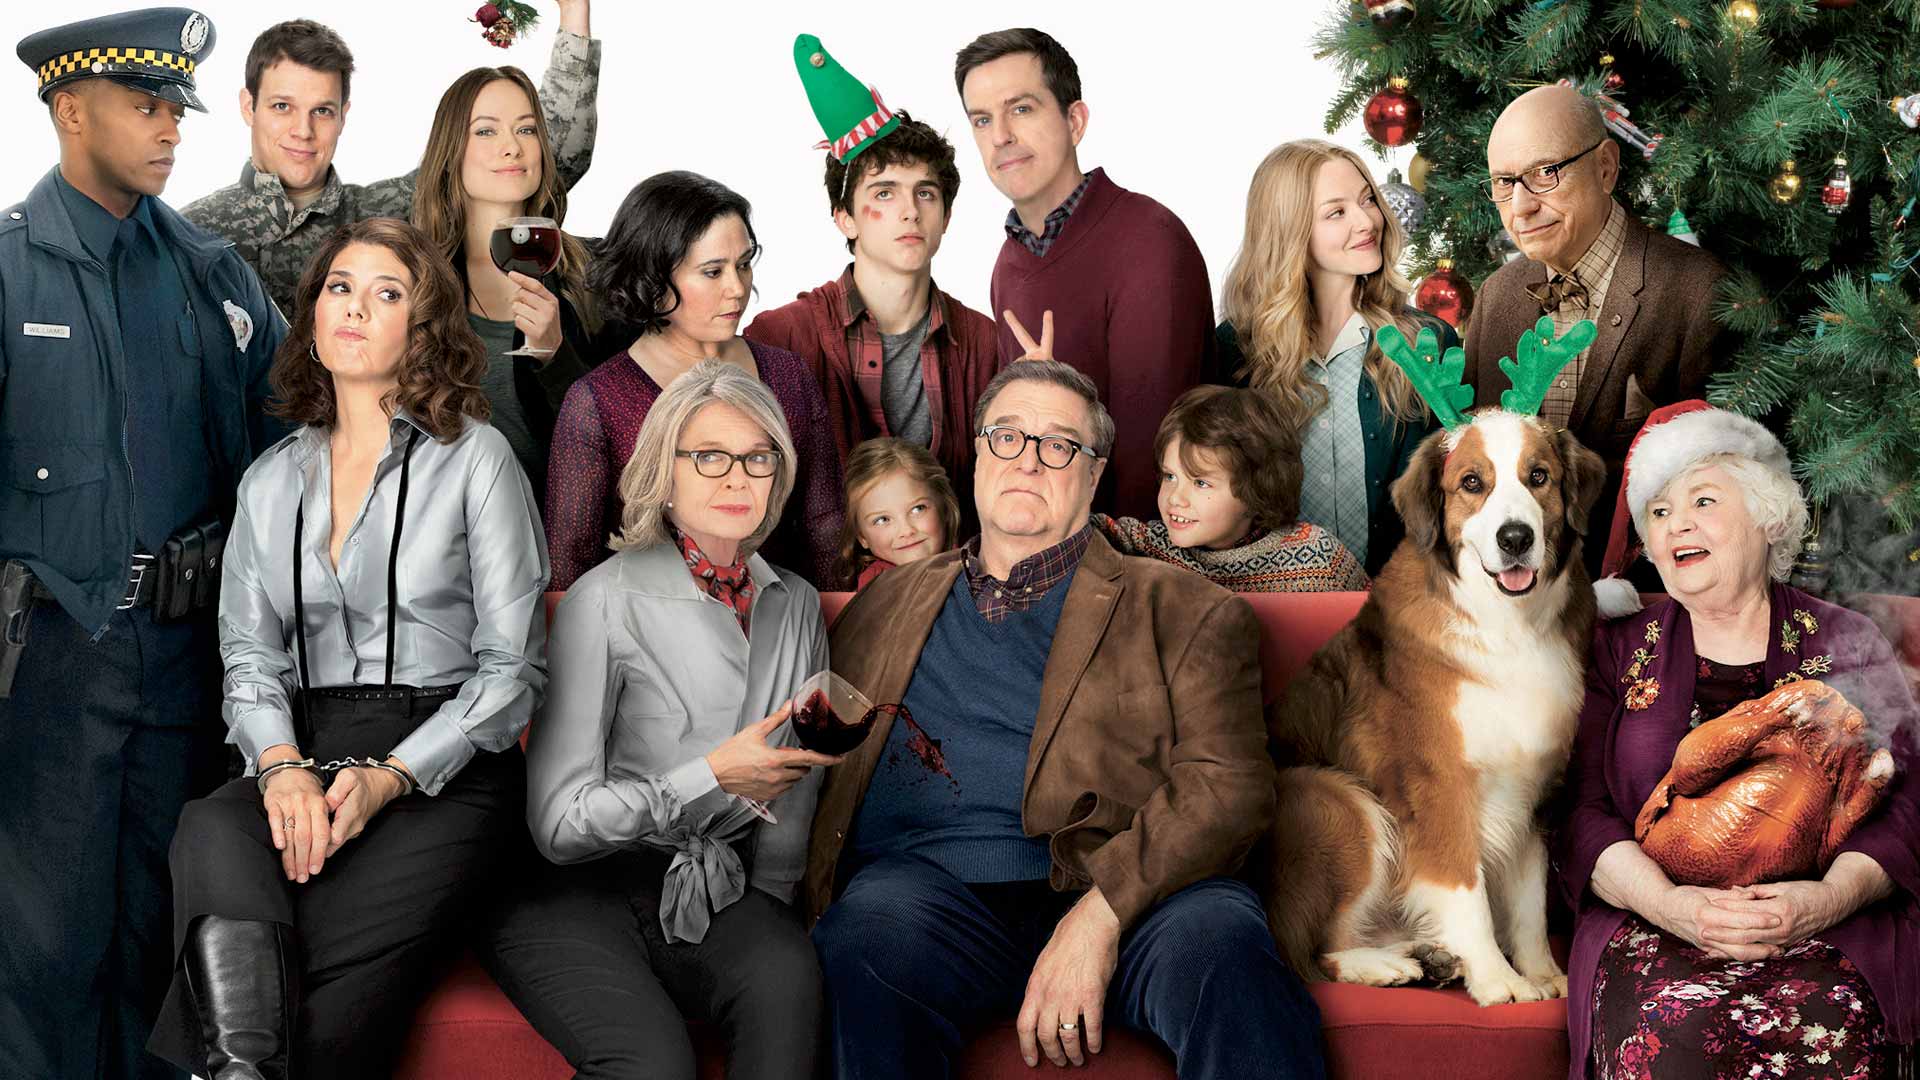 Images of Love The Coopers | 1920x1080